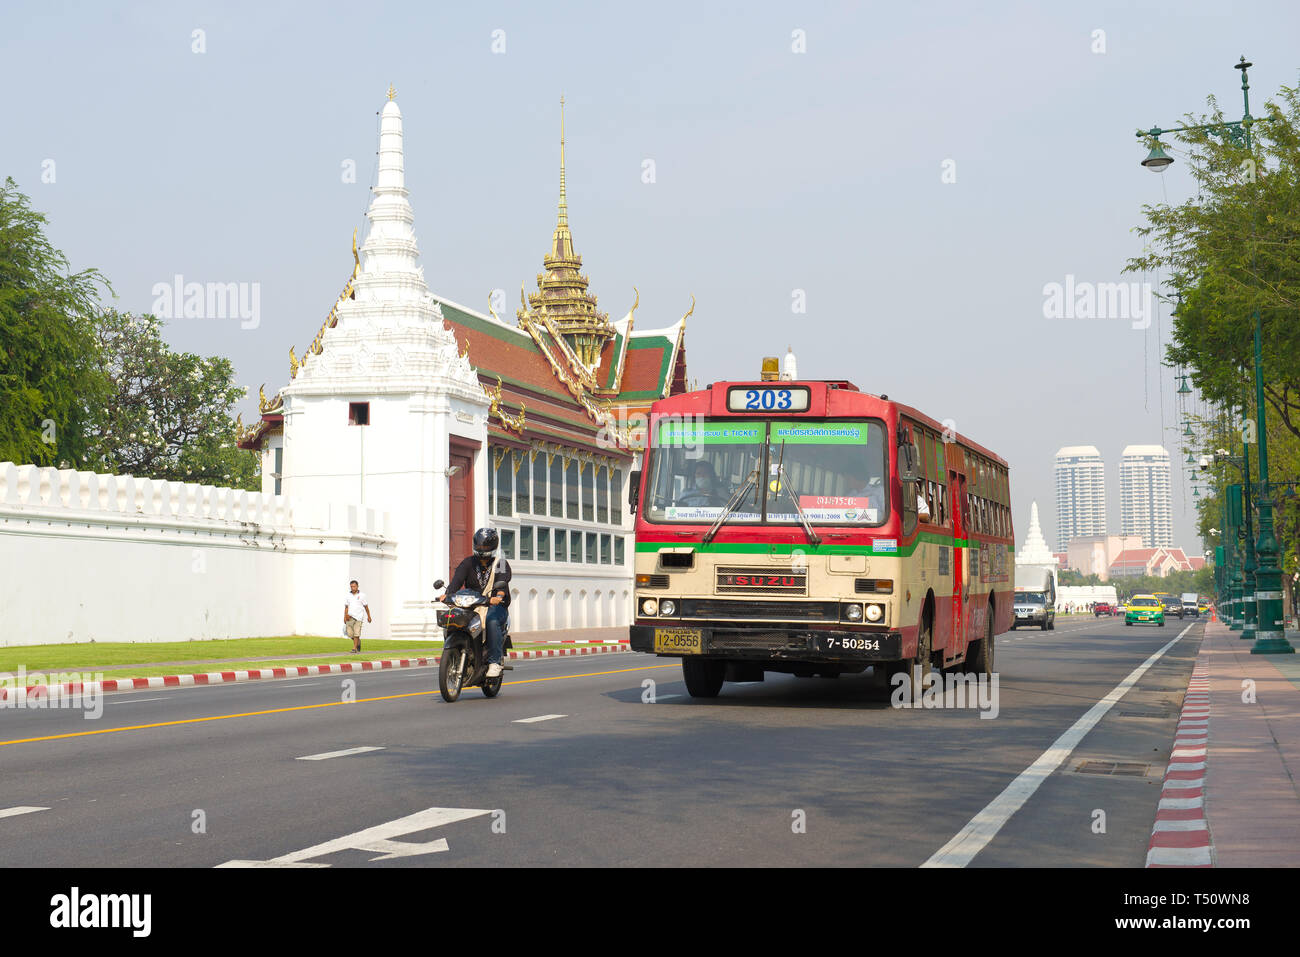 BANGKOK, THAILAND - DECEMBER 28, 2018: City bus route number 203 at the  walls of the Royal Palace on a sunny morning Stock Photo - Alamy